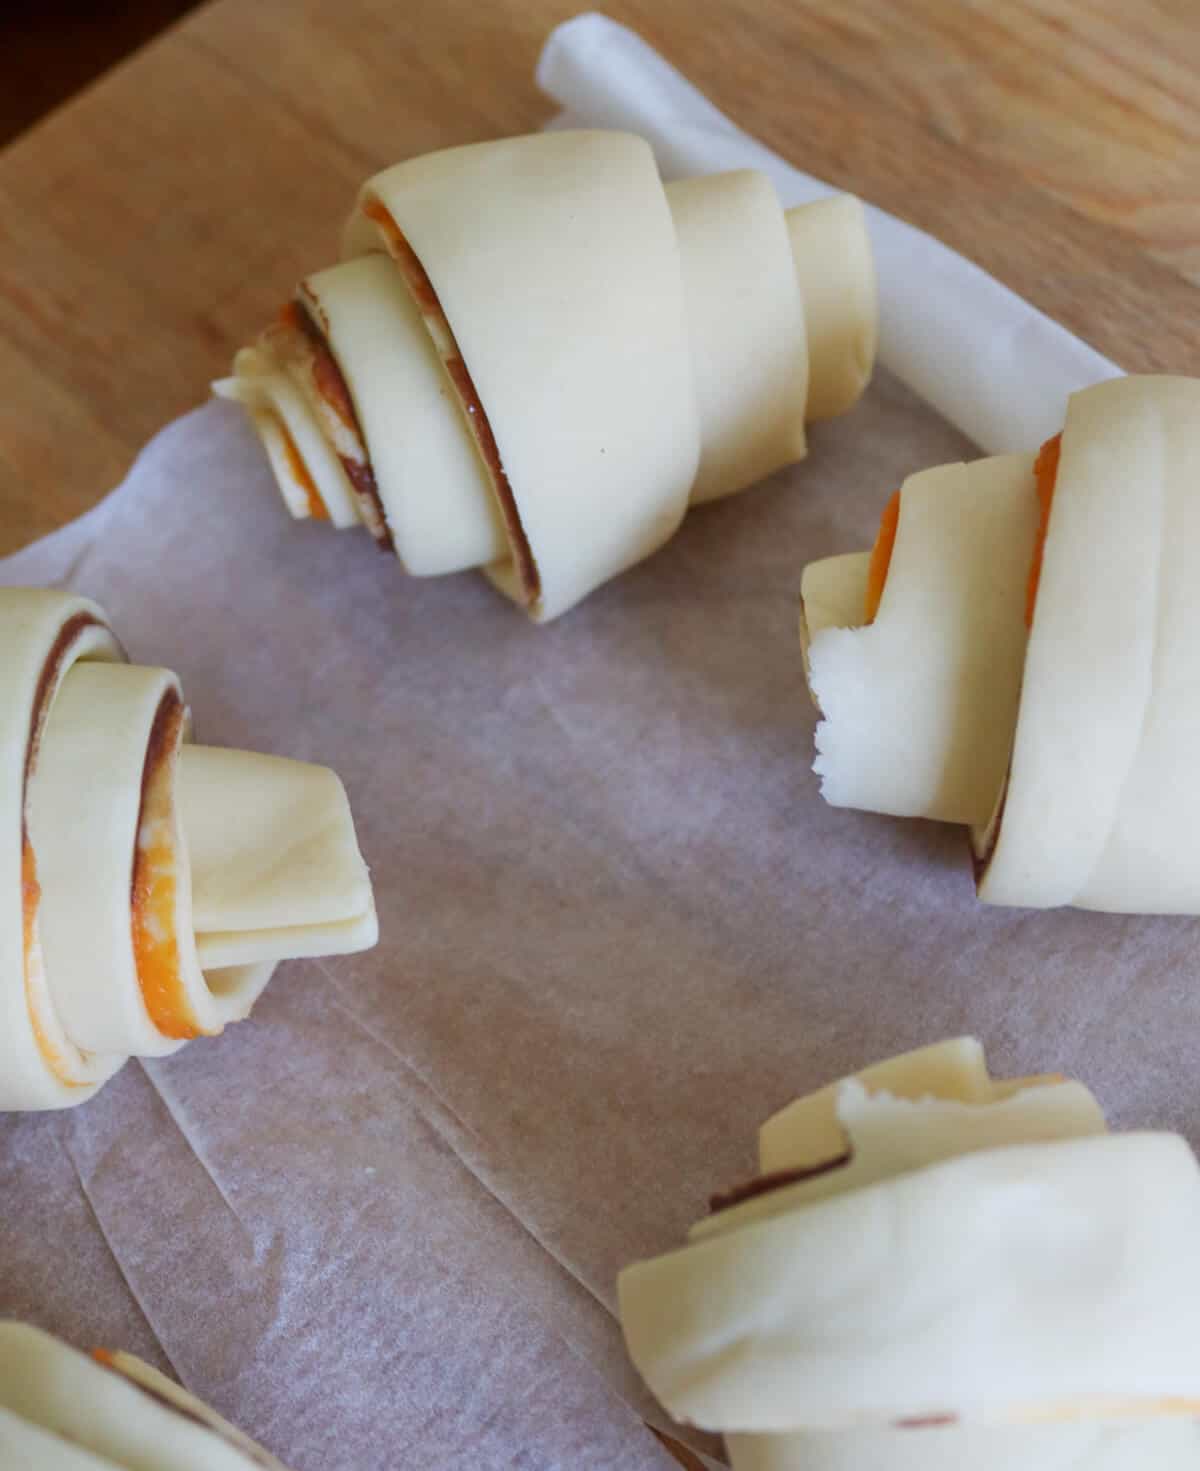 Puff pastry croissants on a surface about to be baked.